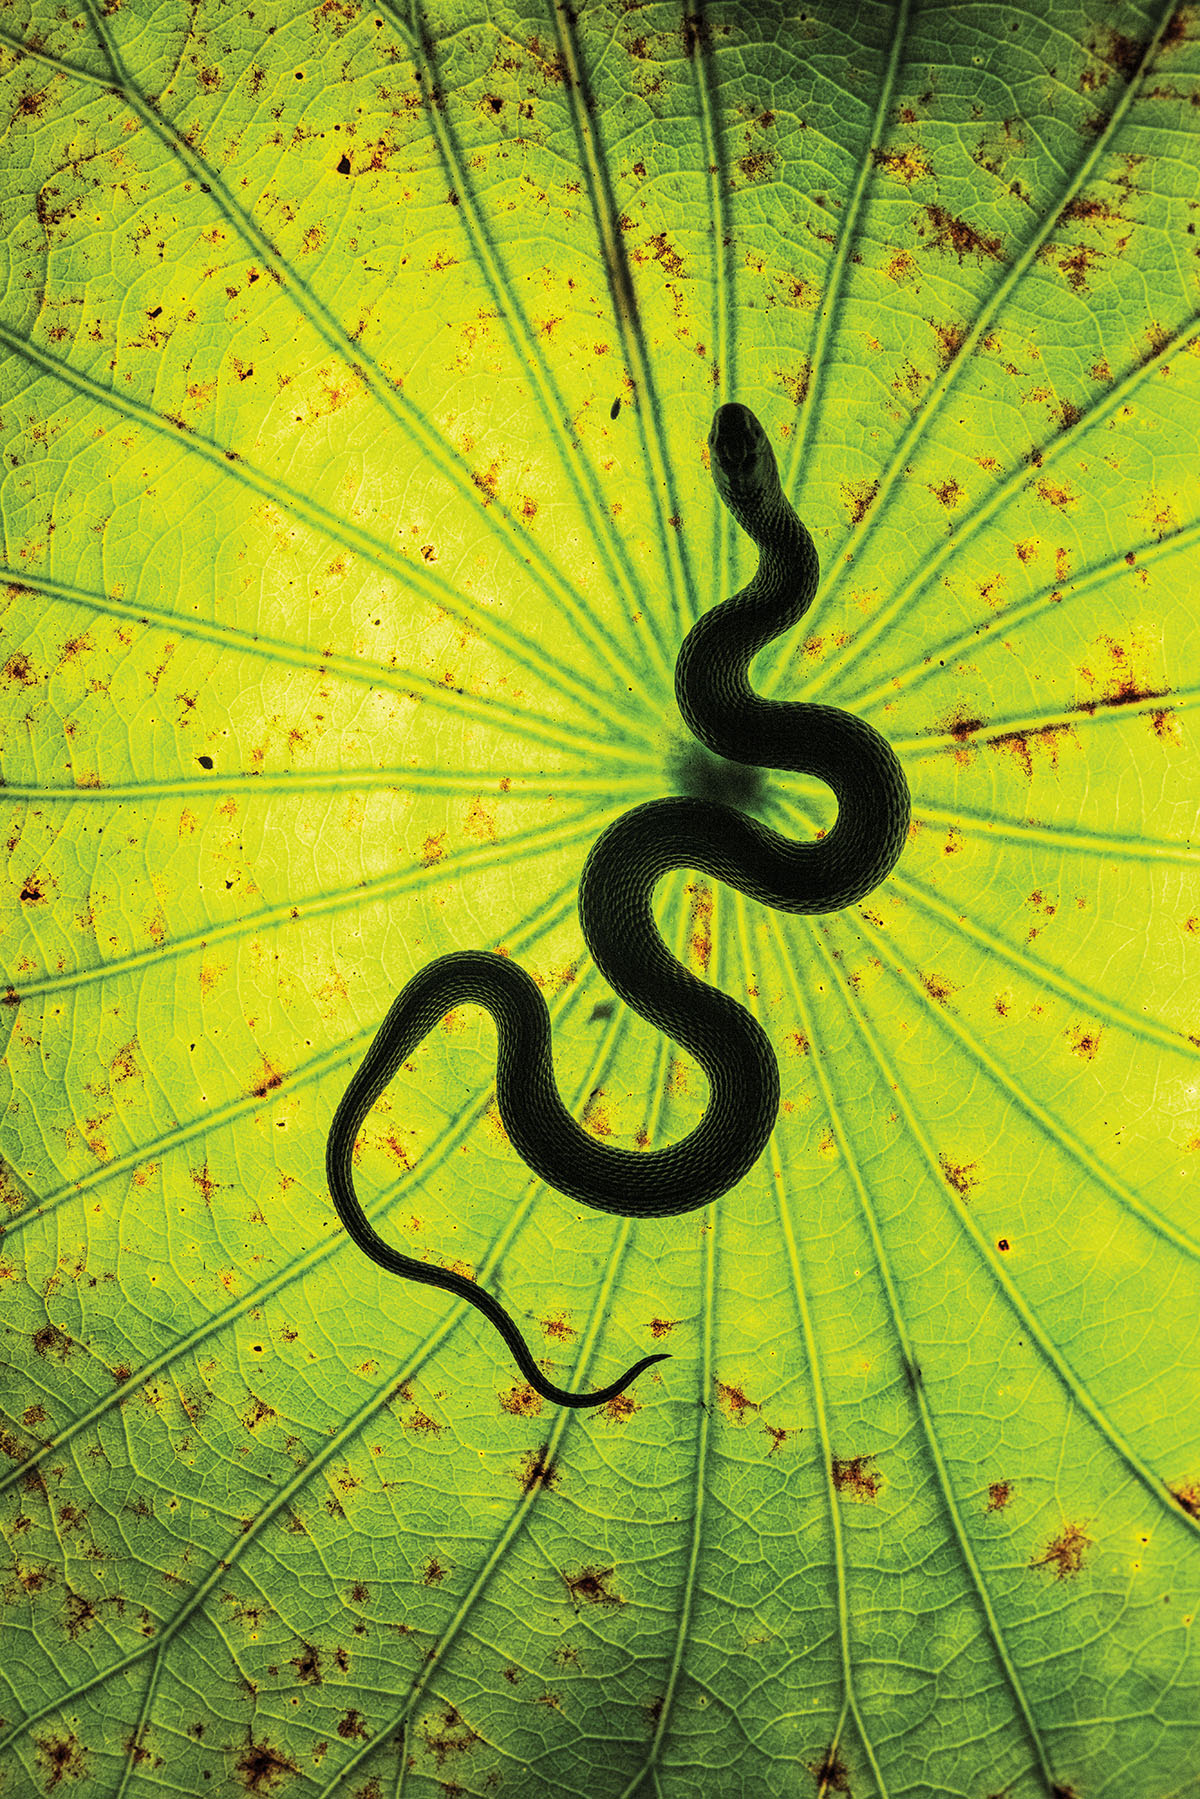 A snake is seen slithering across a bright green lily pad. The photograph is backlit leaving a green leaf and silhouette of a snake.